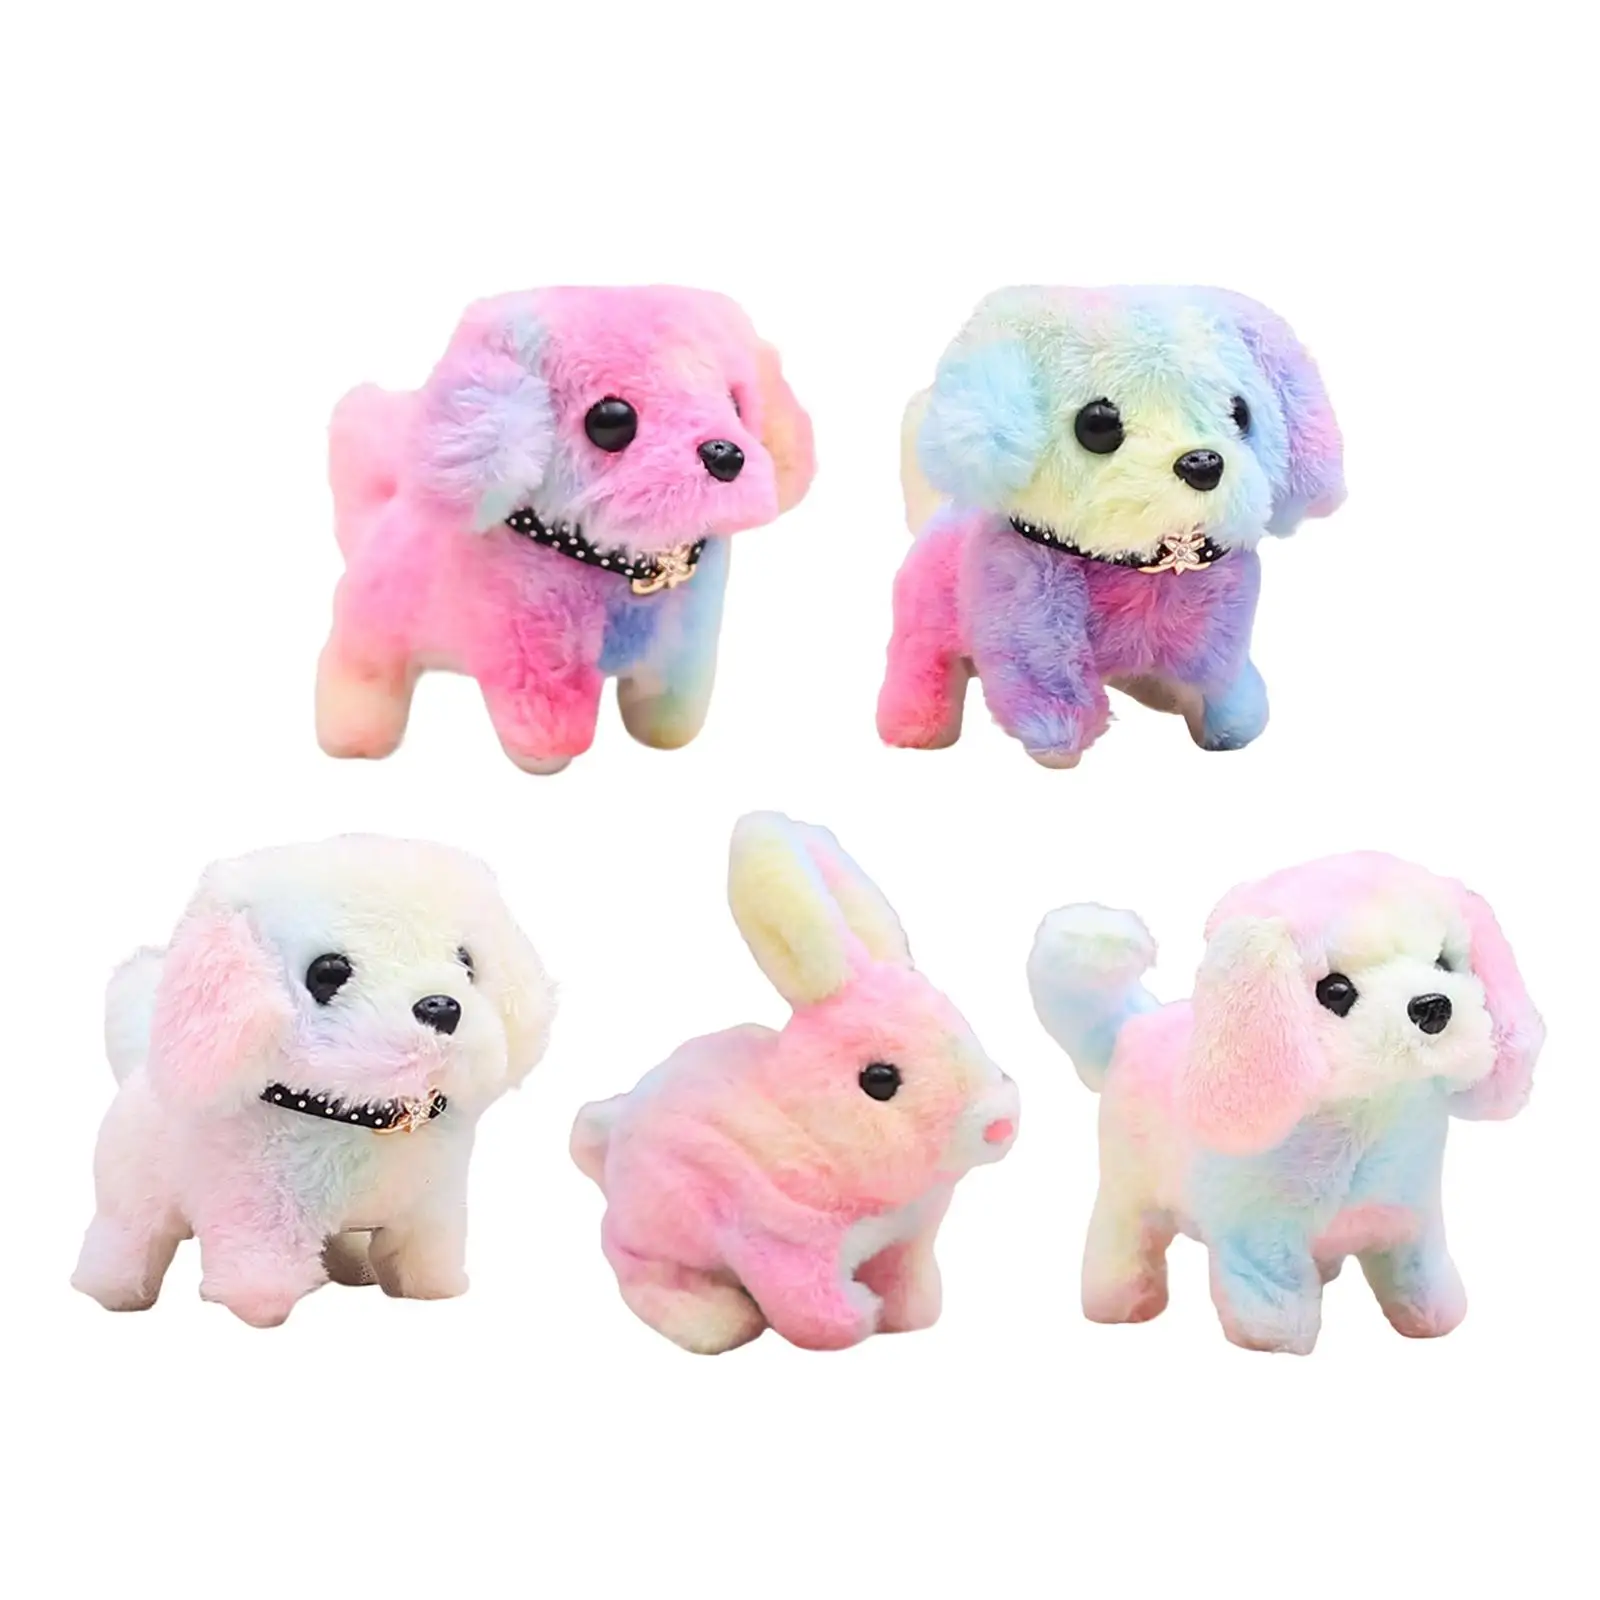 Interactive Electronic Pet Soft Stuffed Animals for Children Toys Christmas Present Party Favor Birthday Gifts Boys Girls